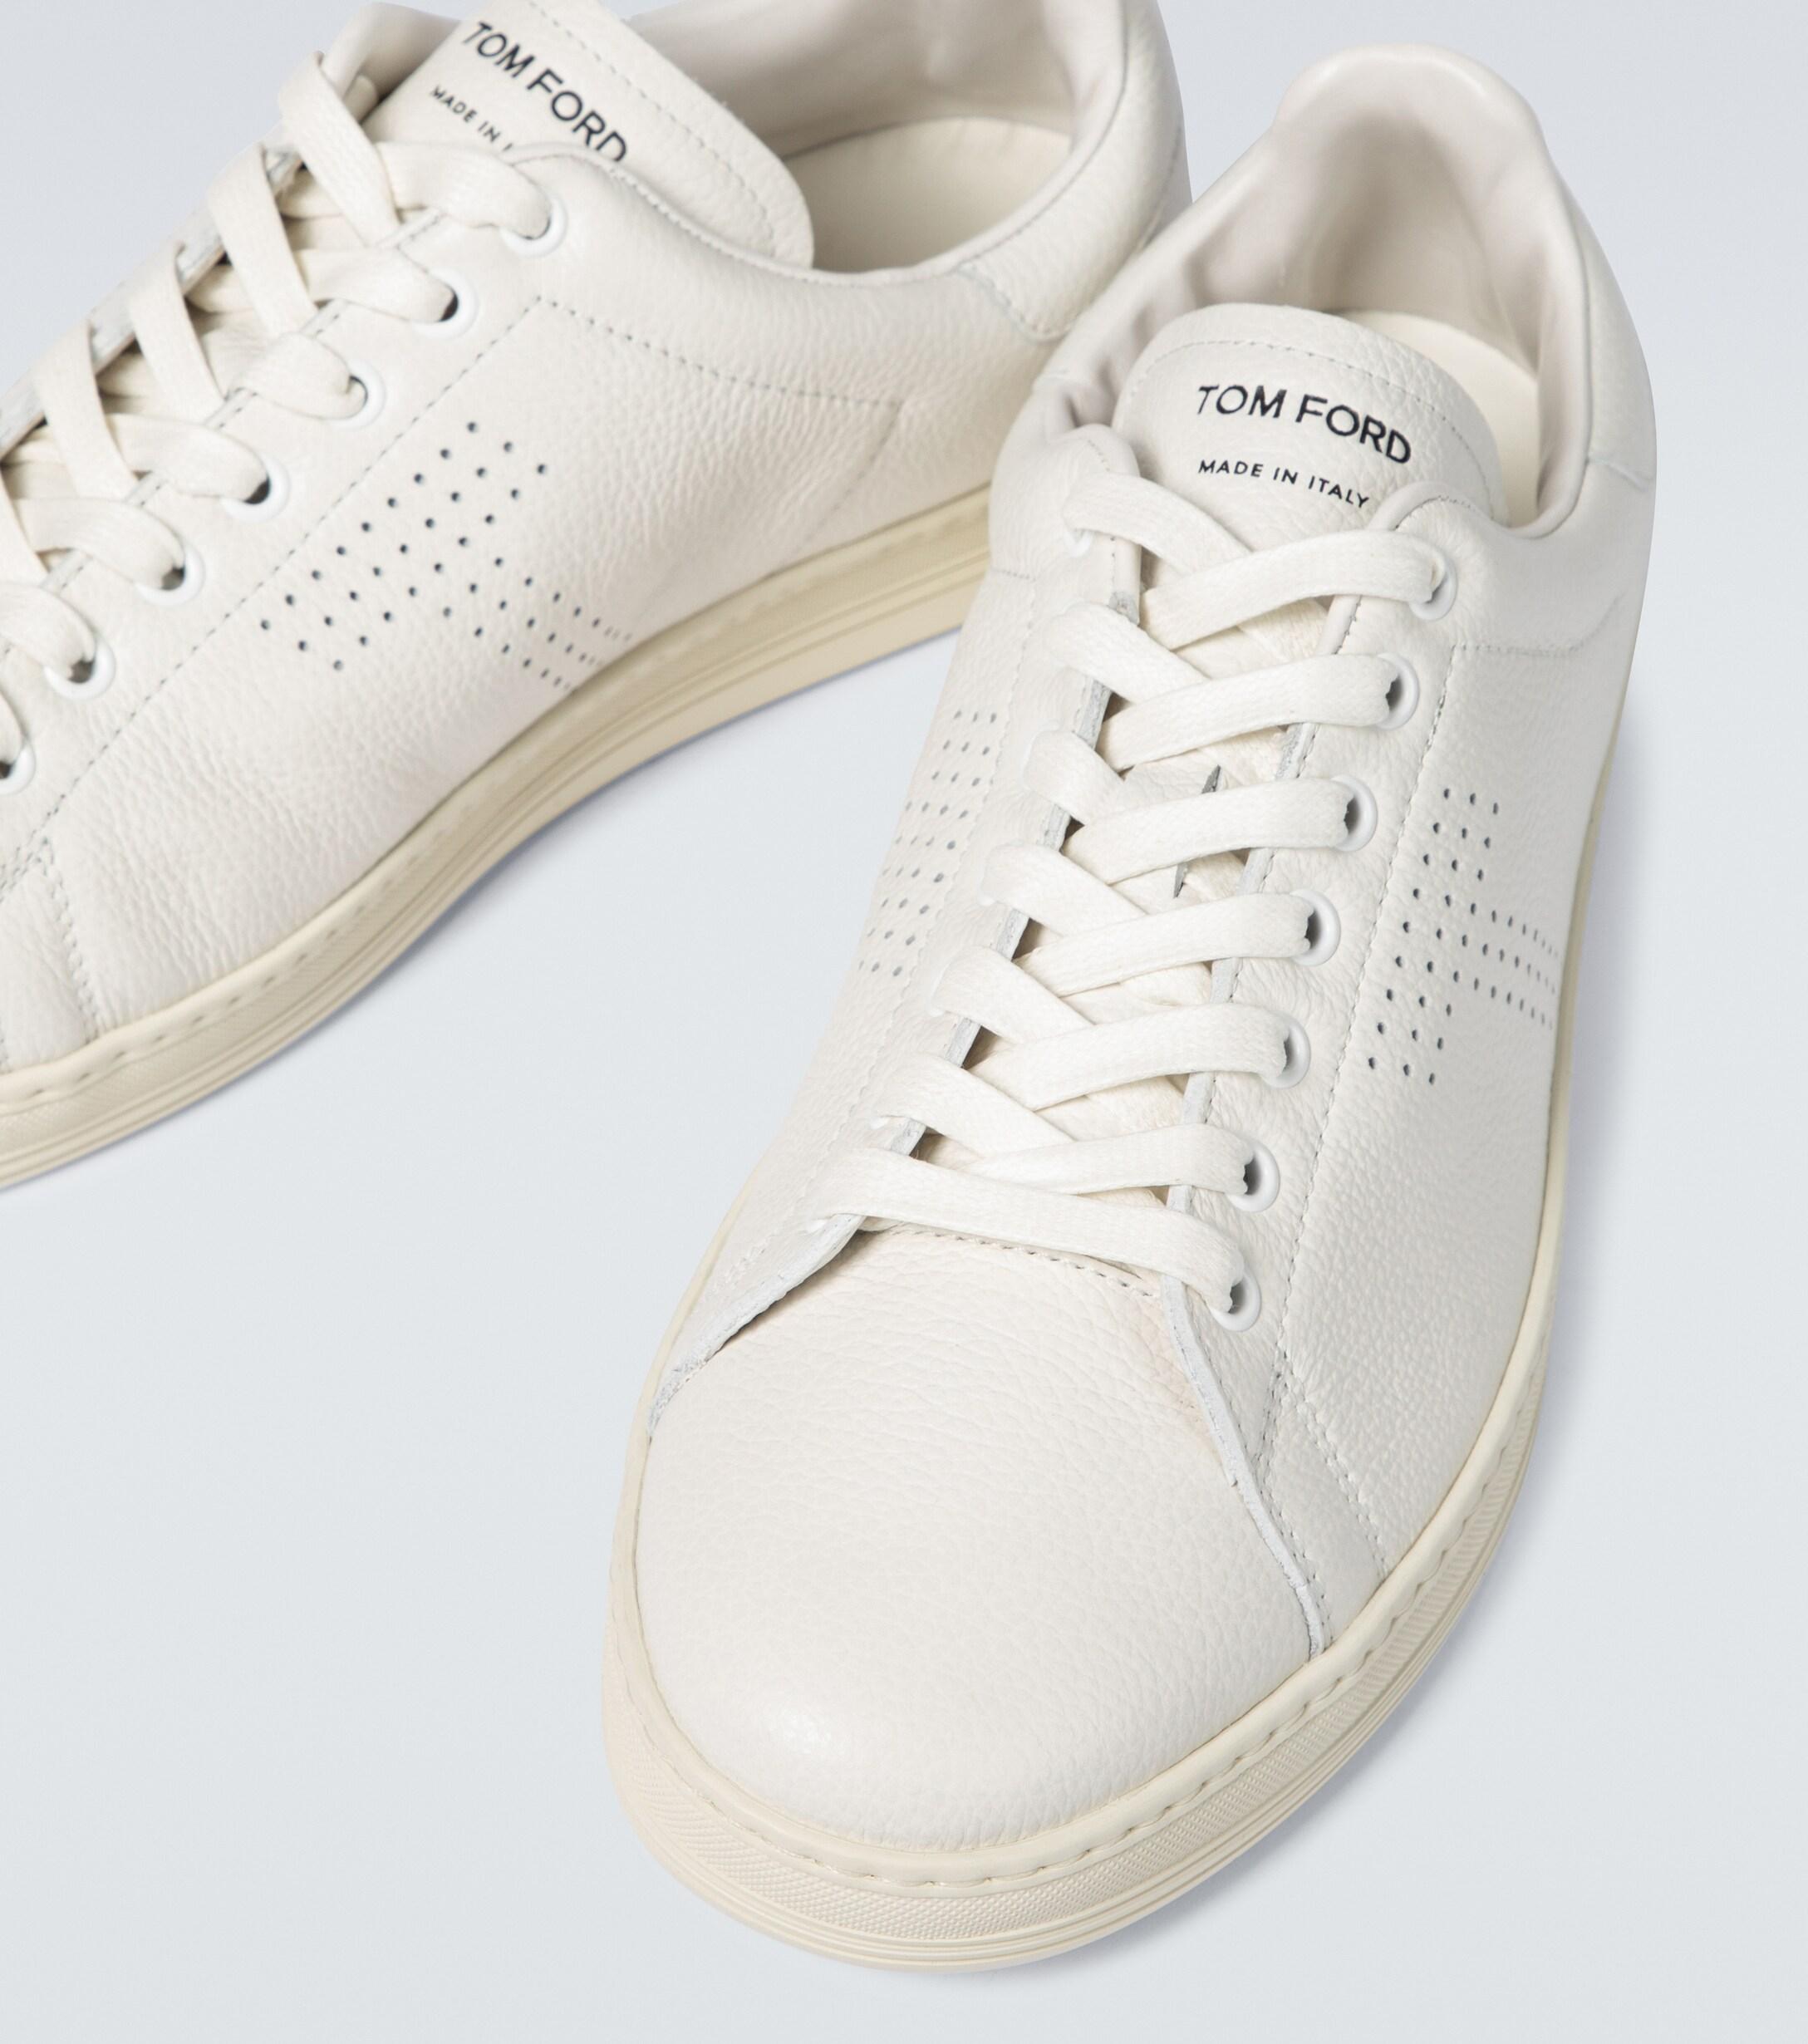 Tom Ford Warwick Grained Leather Sneakers in White for Men - Lyst